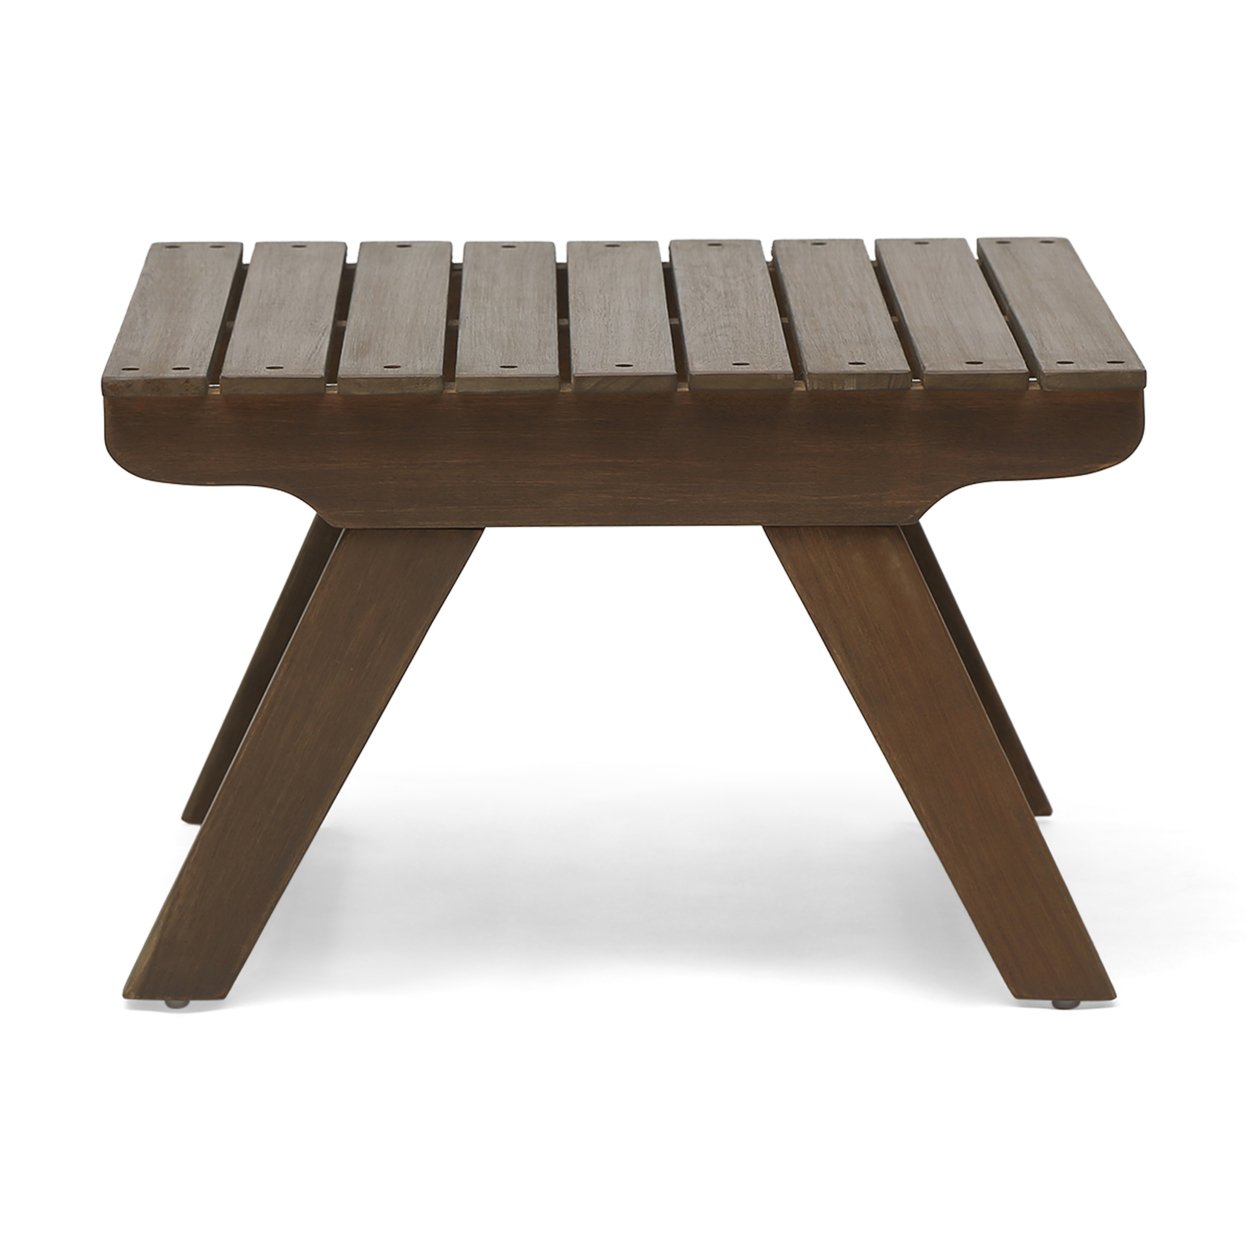 Kailee Outdoor Wooden Side Table - Gray Finish